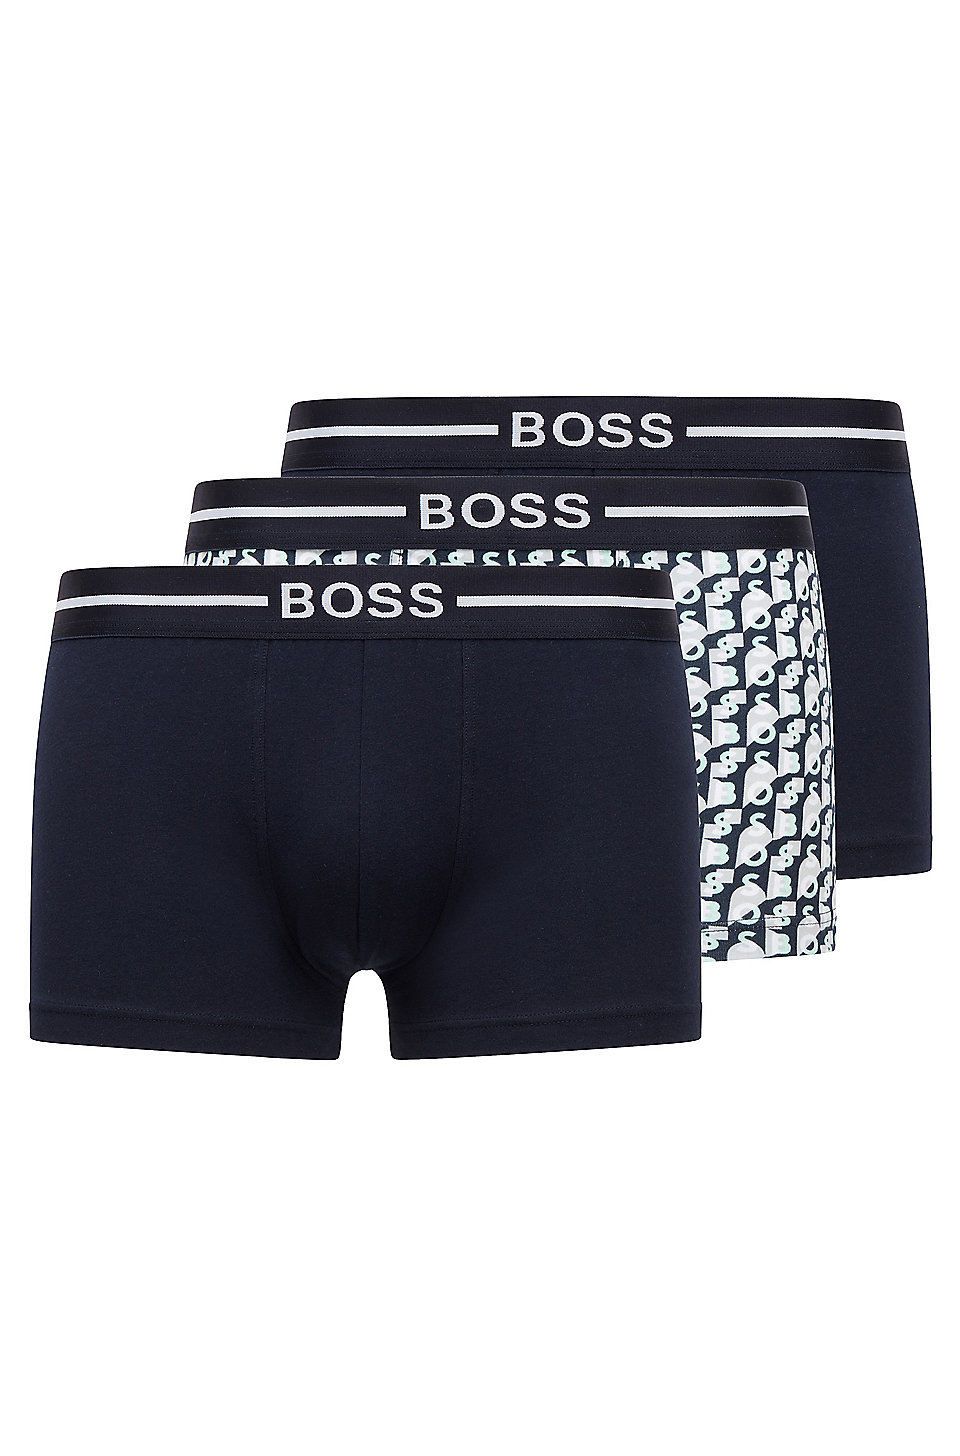 X-L : C, O G/Grey/M, S & A, BOSS Men's 3-Pack T Buy online here ...